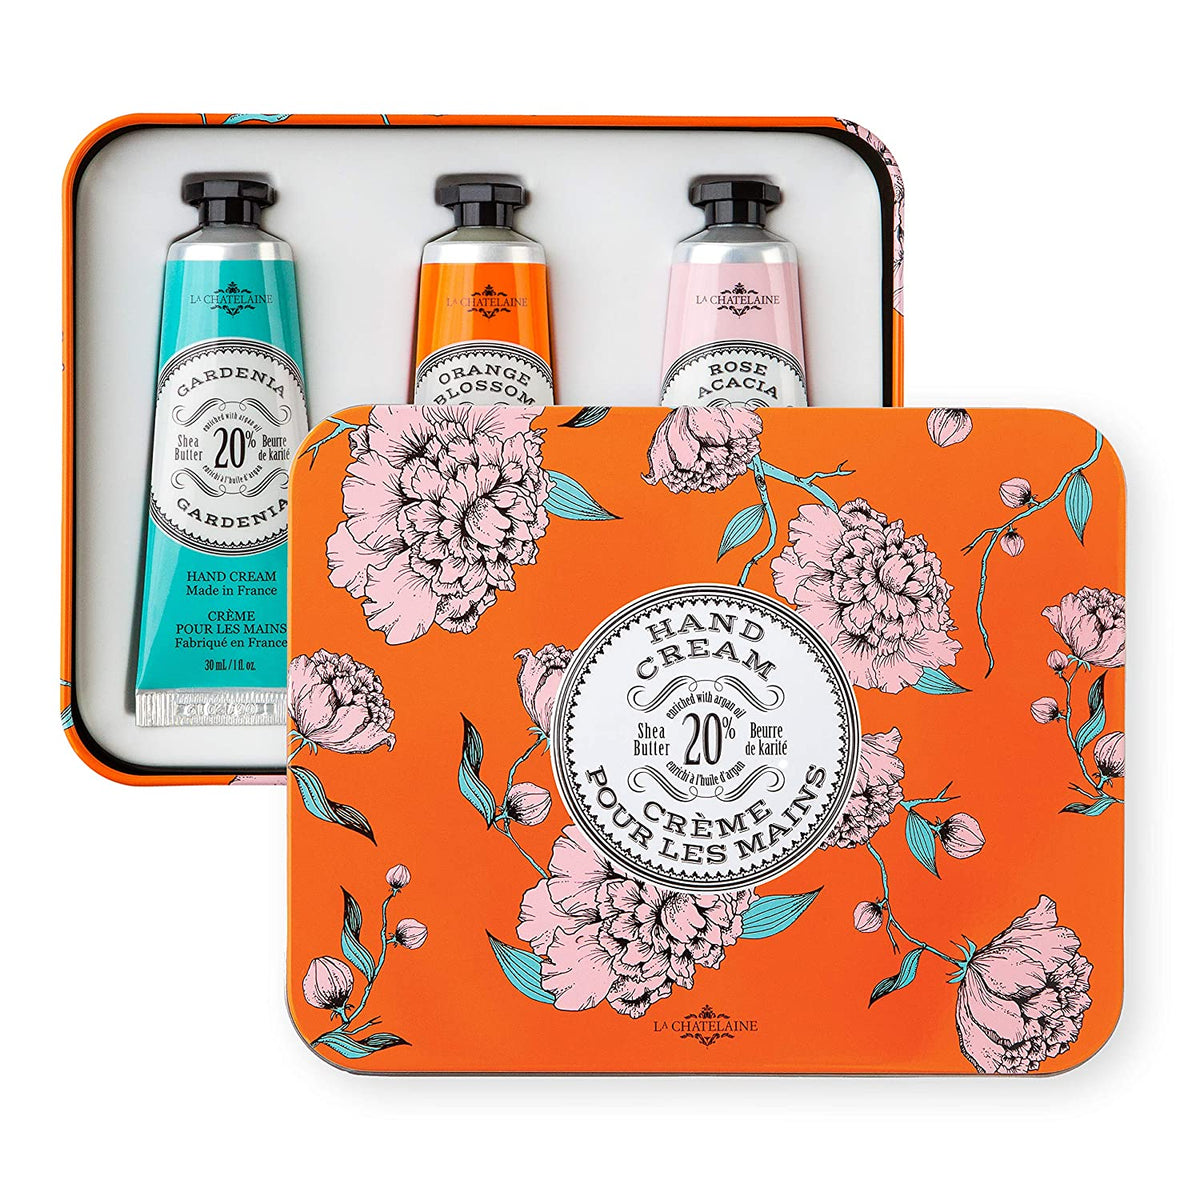 La Chatelaine Hand Cream Trio Collection, featuring Gardenia, Orange Blossom, and Rose Acacia - The Finished Room